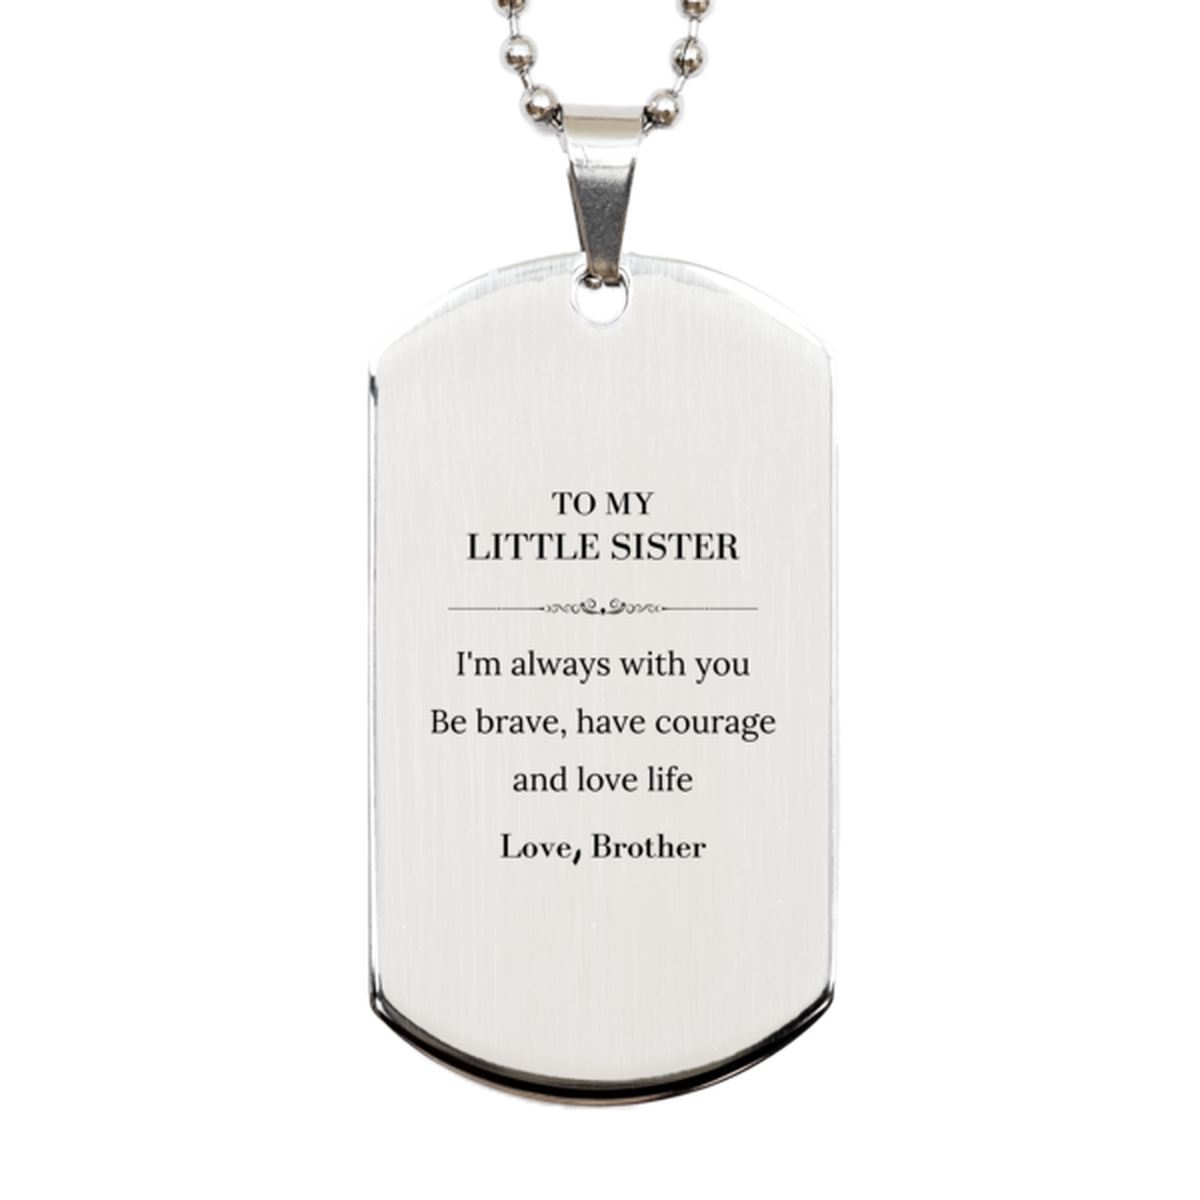 To My Little Sister Gifts from Brother, Unique Silver Dog Tag Inspirational Christmas Birthday Graduation Gifts for Little Sister I'm always with you. Be brave, have courage and love life. Love, Brother